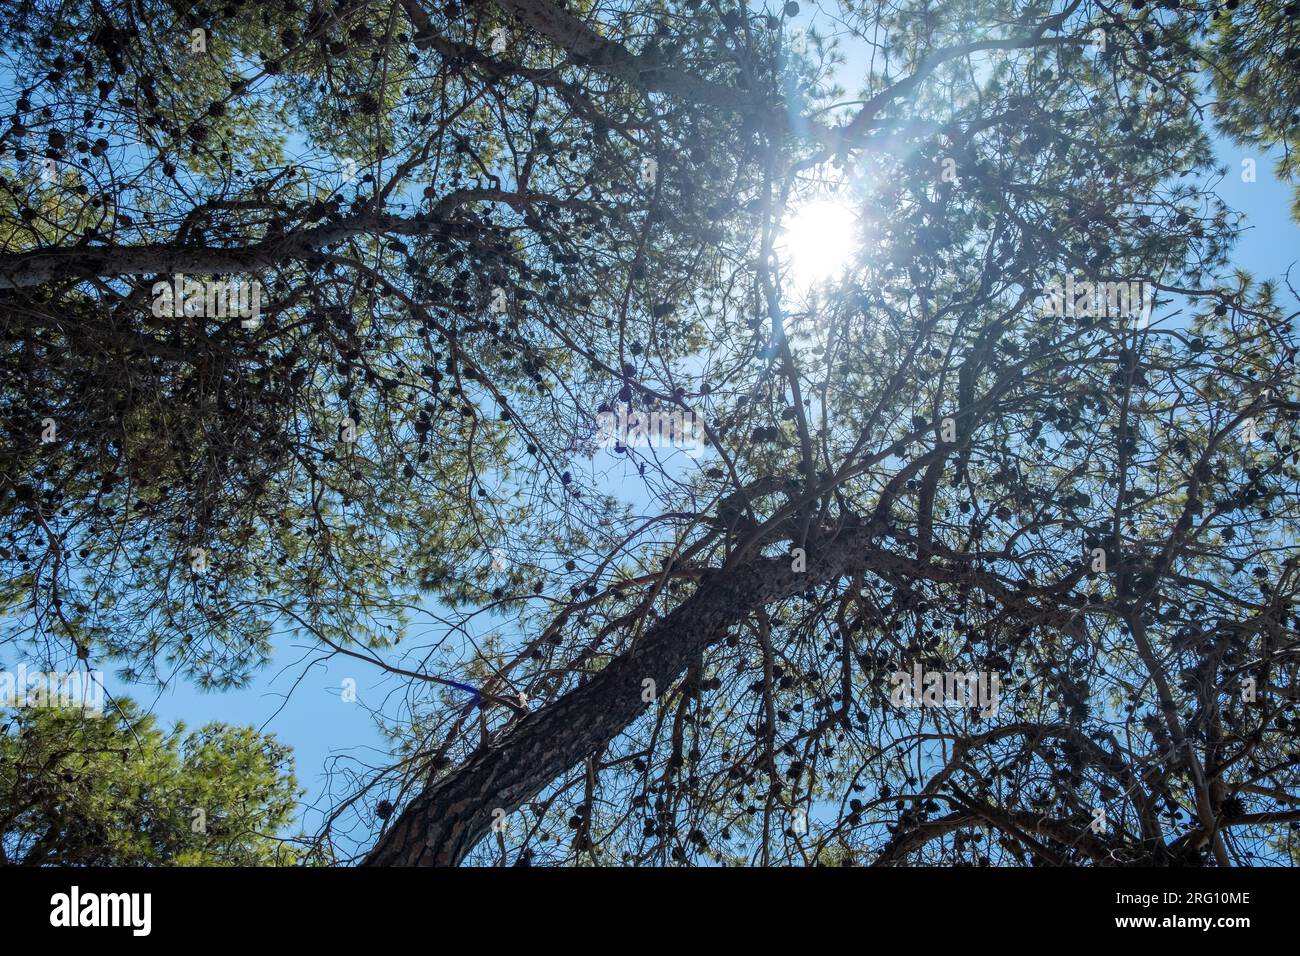 a tree with sun shining through branches Stock Photo